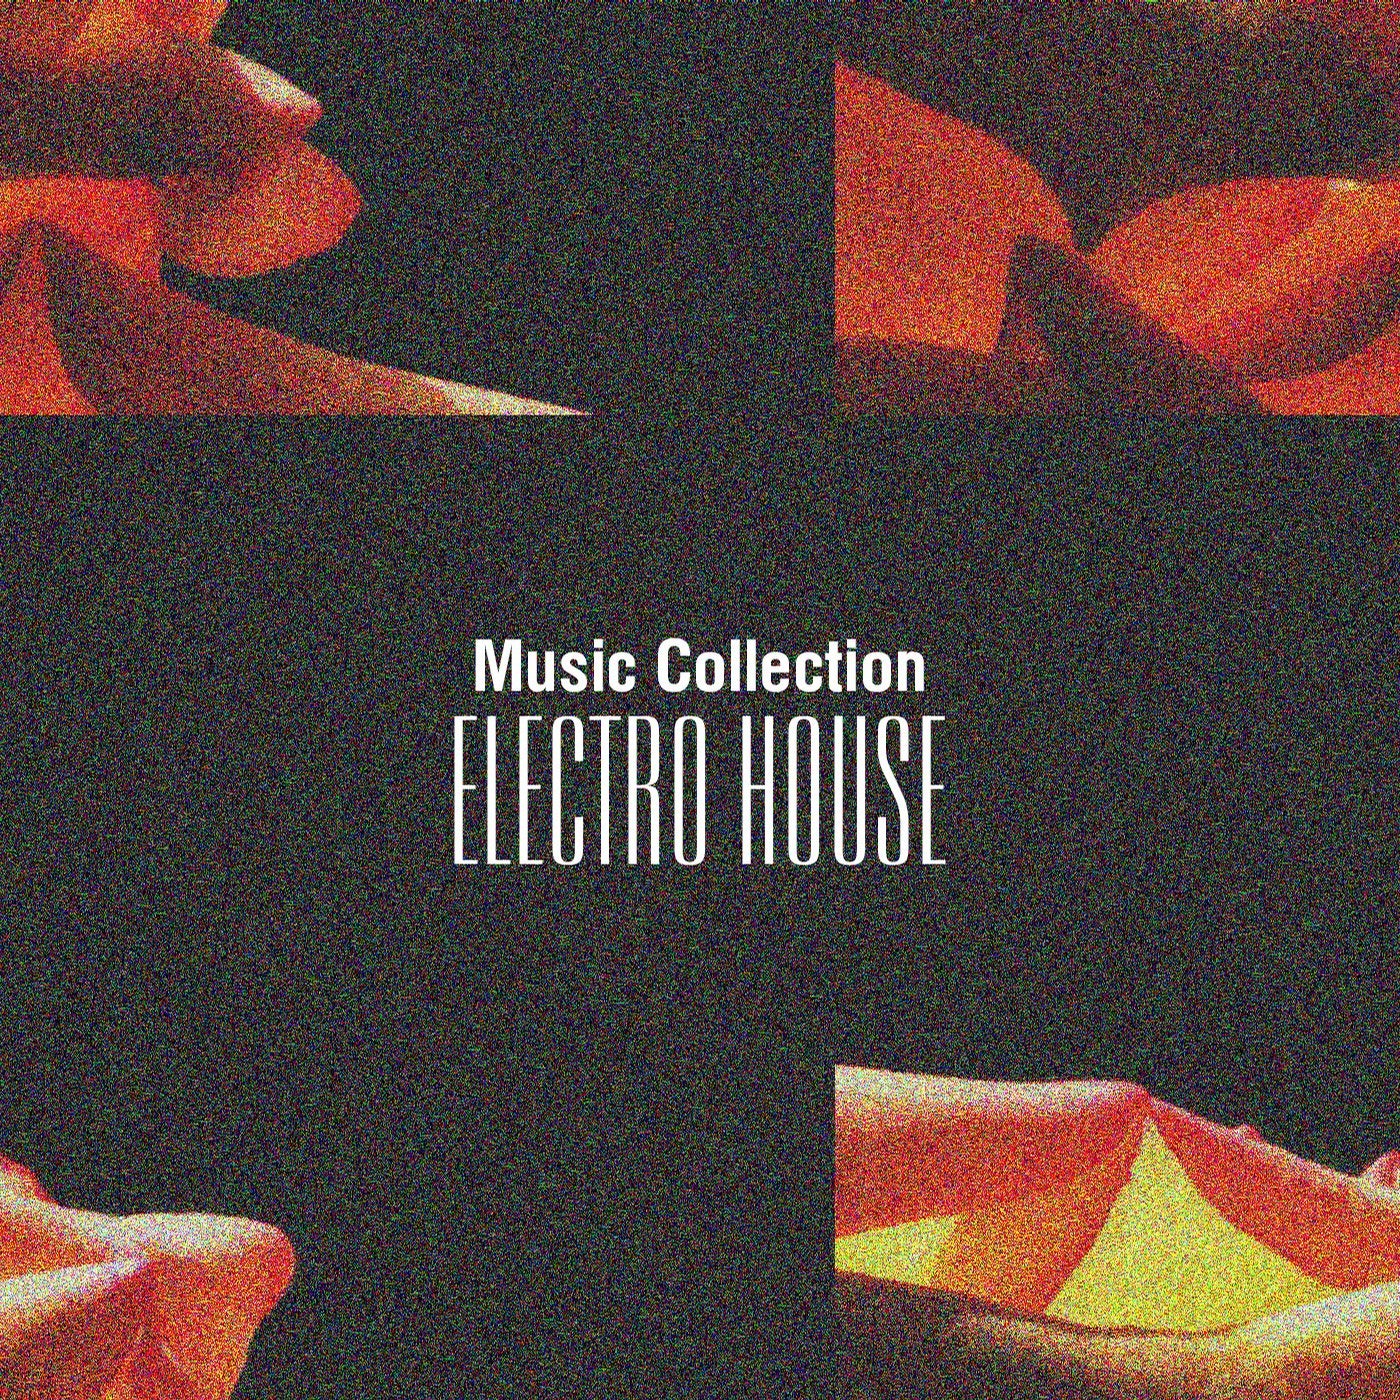 Music Collection. Electro House